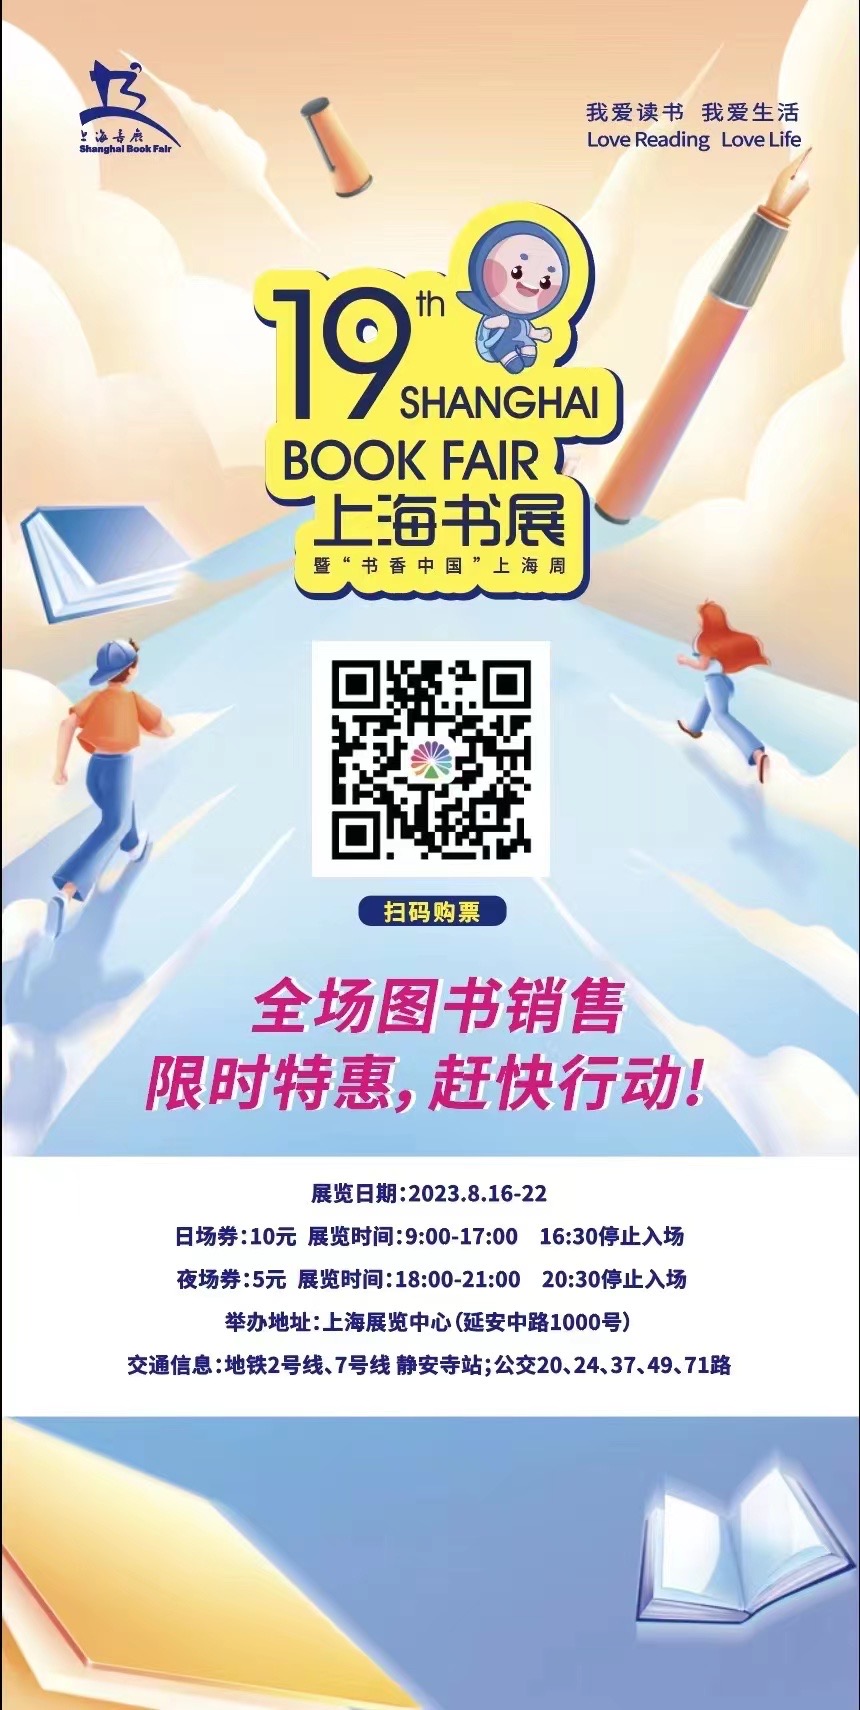 Ticket sales for the 2023 Shanghai Book Fair are open! Ticket Purchase Entry Strategy - Today at 15:00 Gate | Shanghai | Ticket Sales